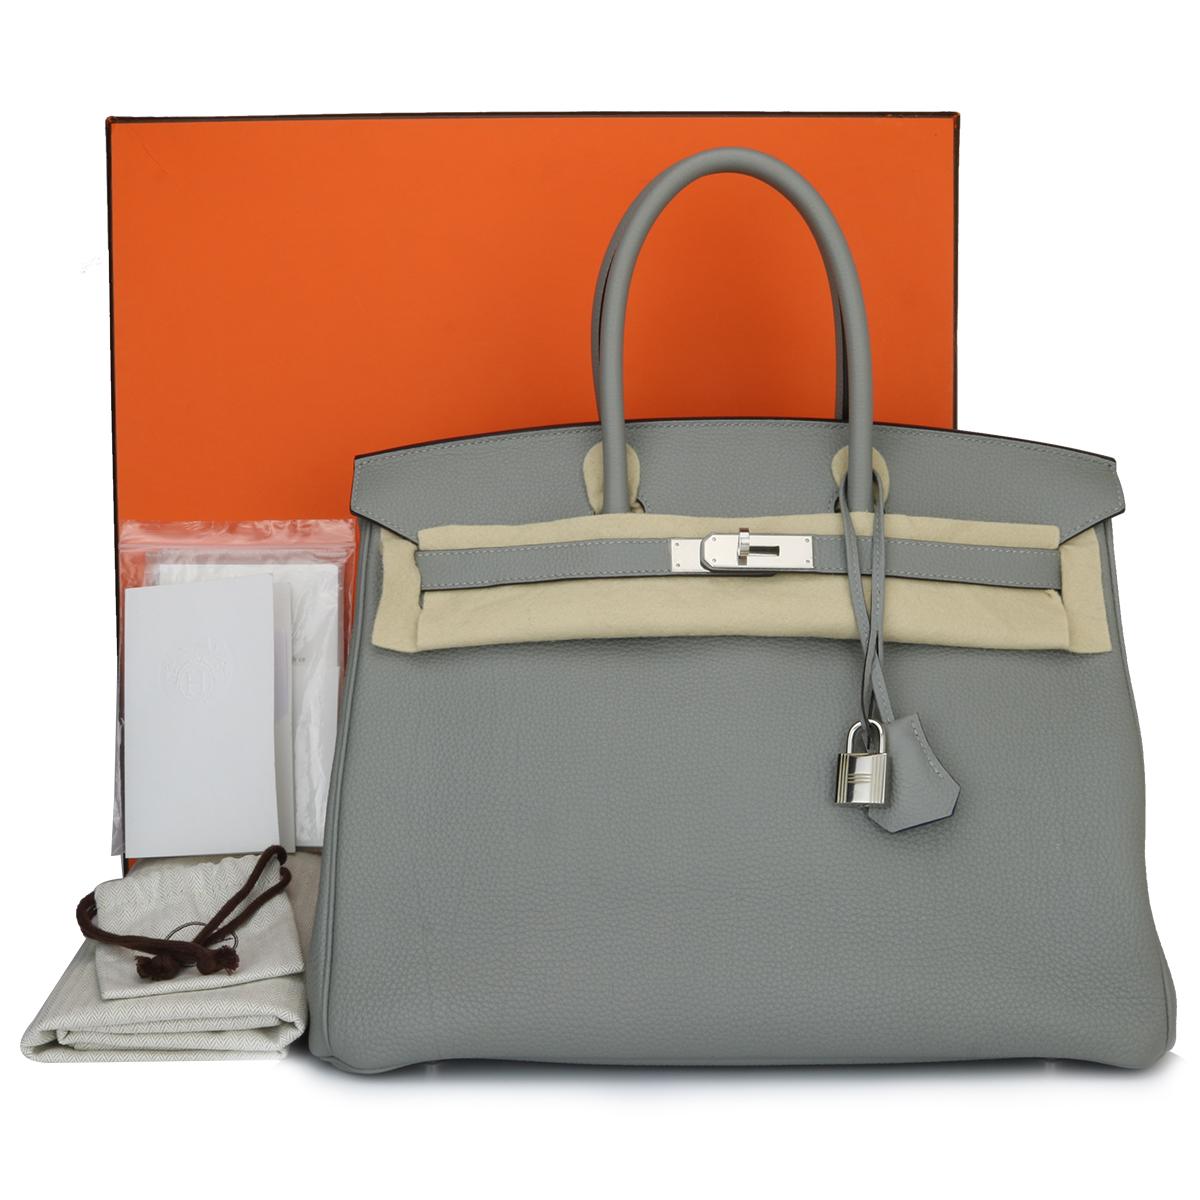 Authentic Hermès Birkin 35cm Gris Mouette/Bleu Agate Togo Leather with Palladium Hardware Stamp X 2016.

This bag is still in a Pristine-Brand New condition. The leather still smells fresh as when new, along with it still holding to the original